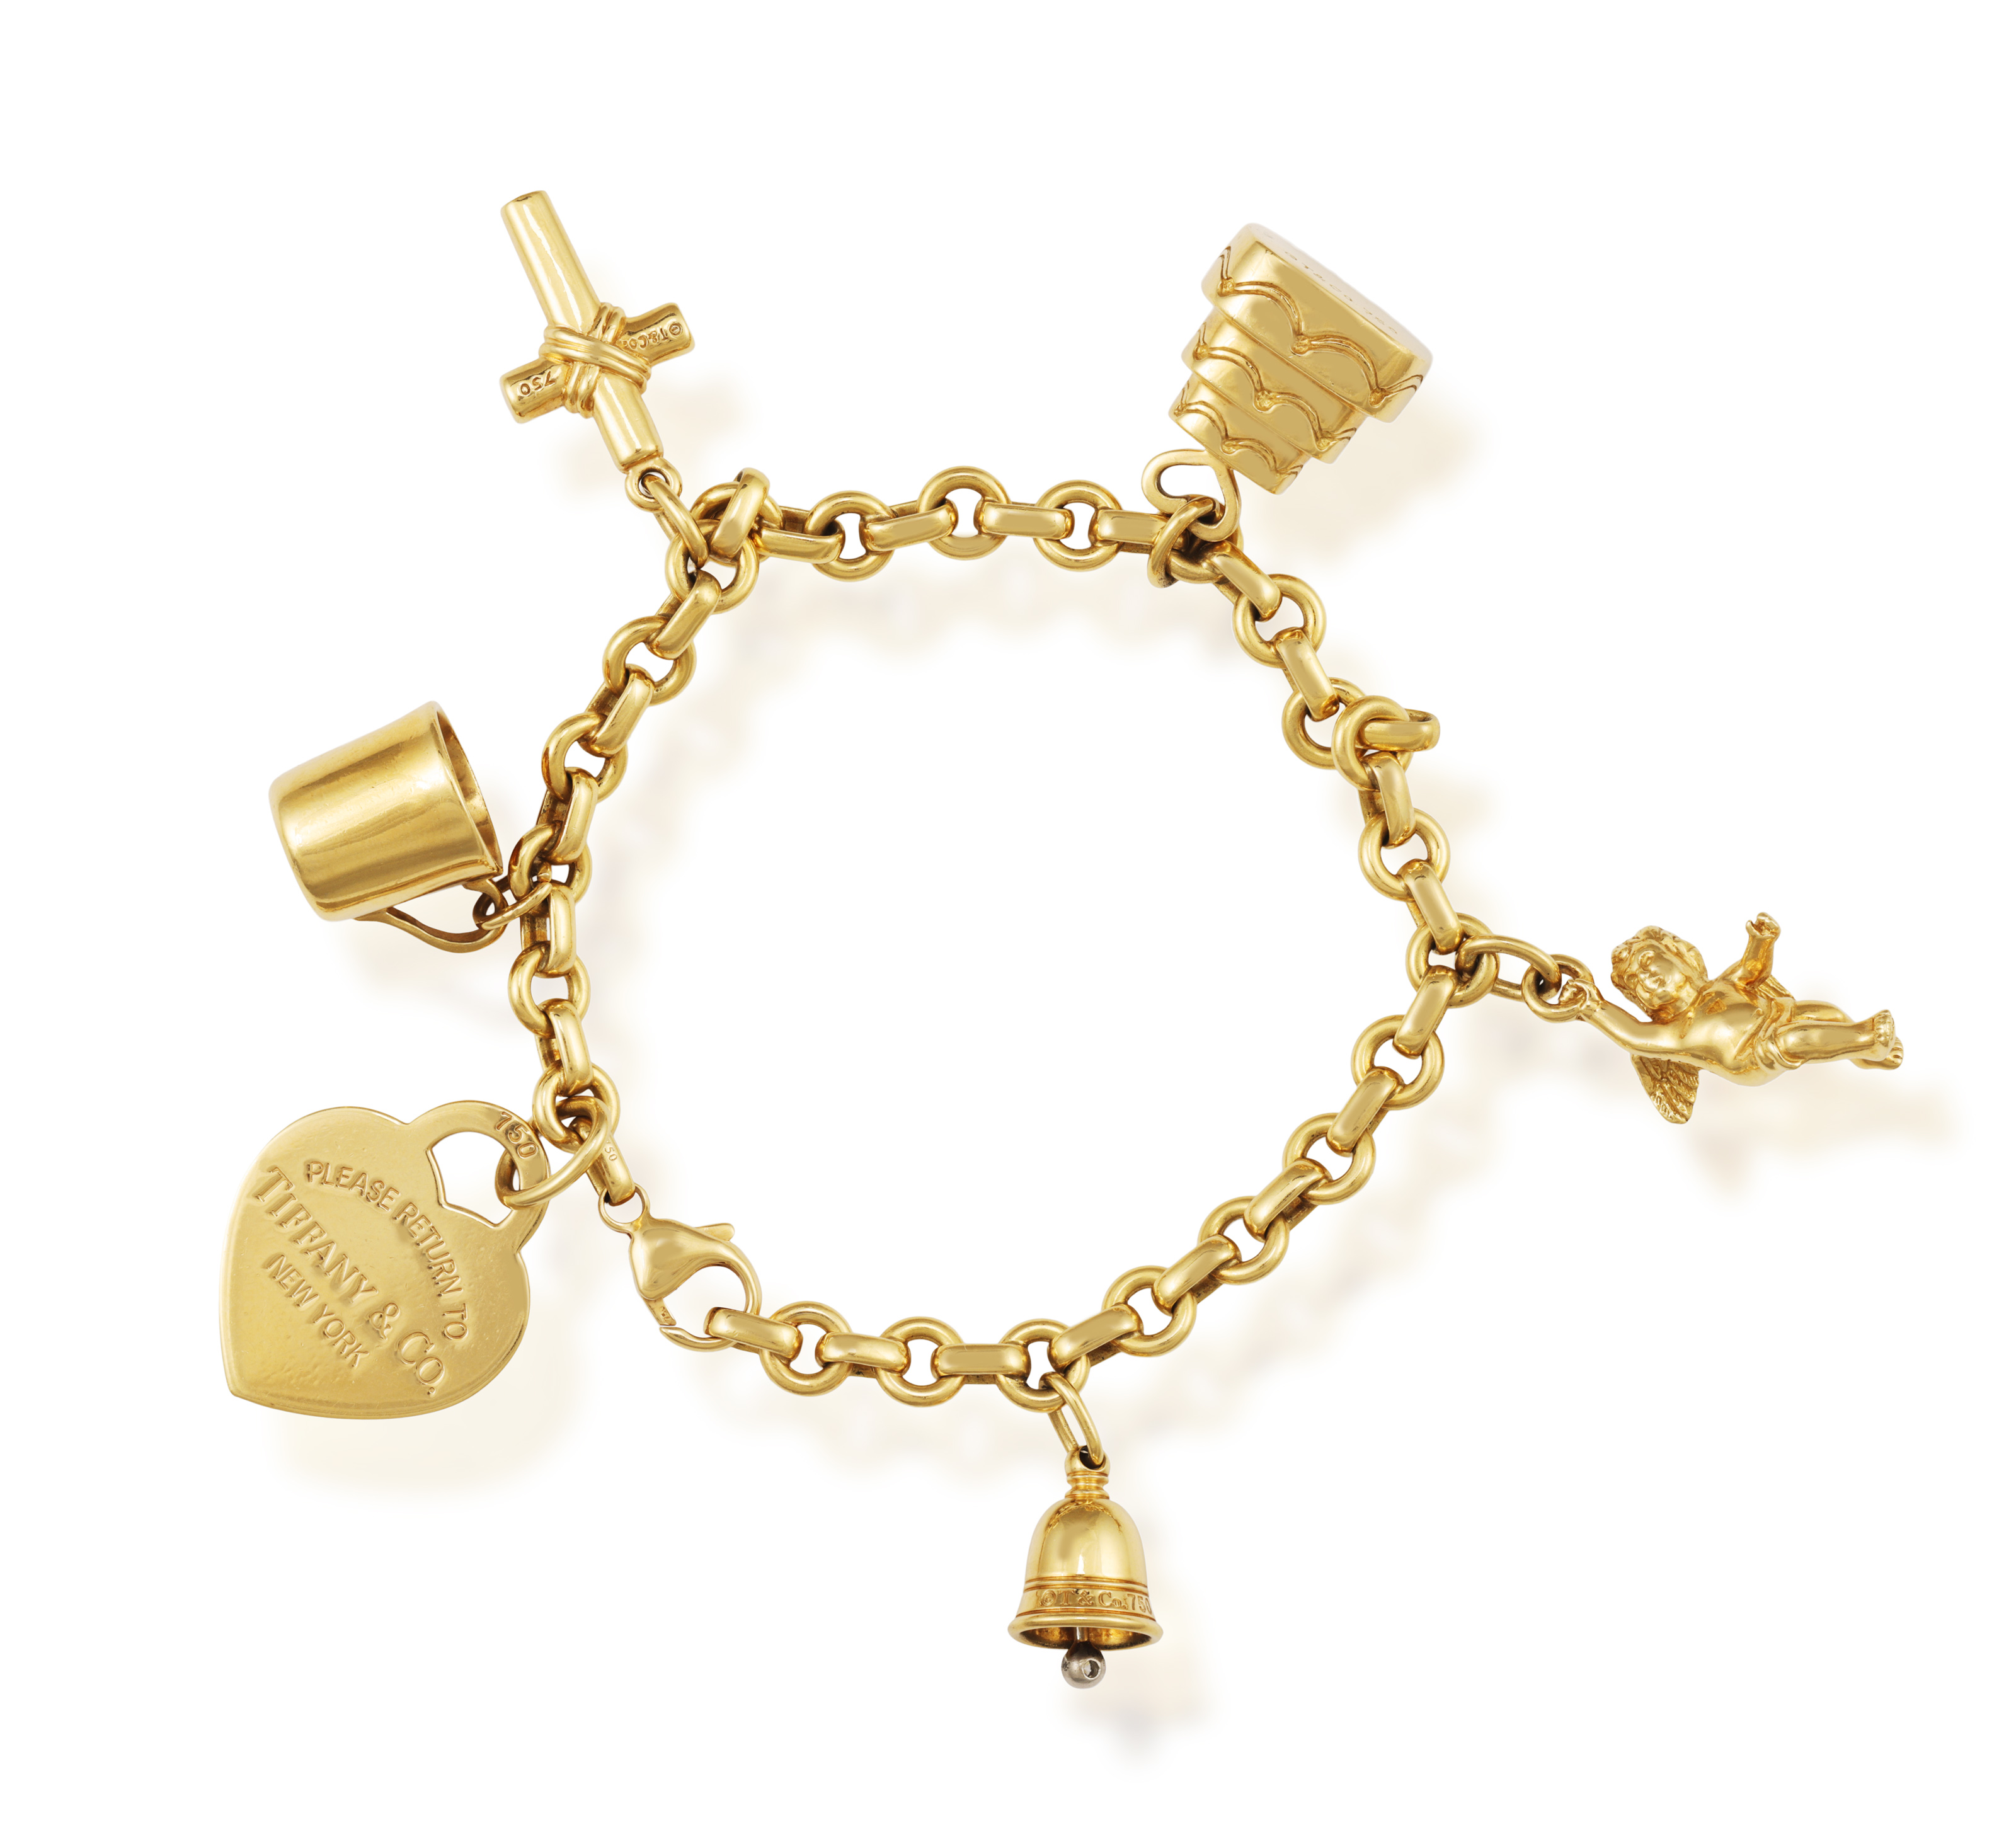 A GOLD AND DIAMOND CHARM BRACELET, BY TIFFANY & CO. The cable-link chain suspending six gold charms, - Image 2 of 4